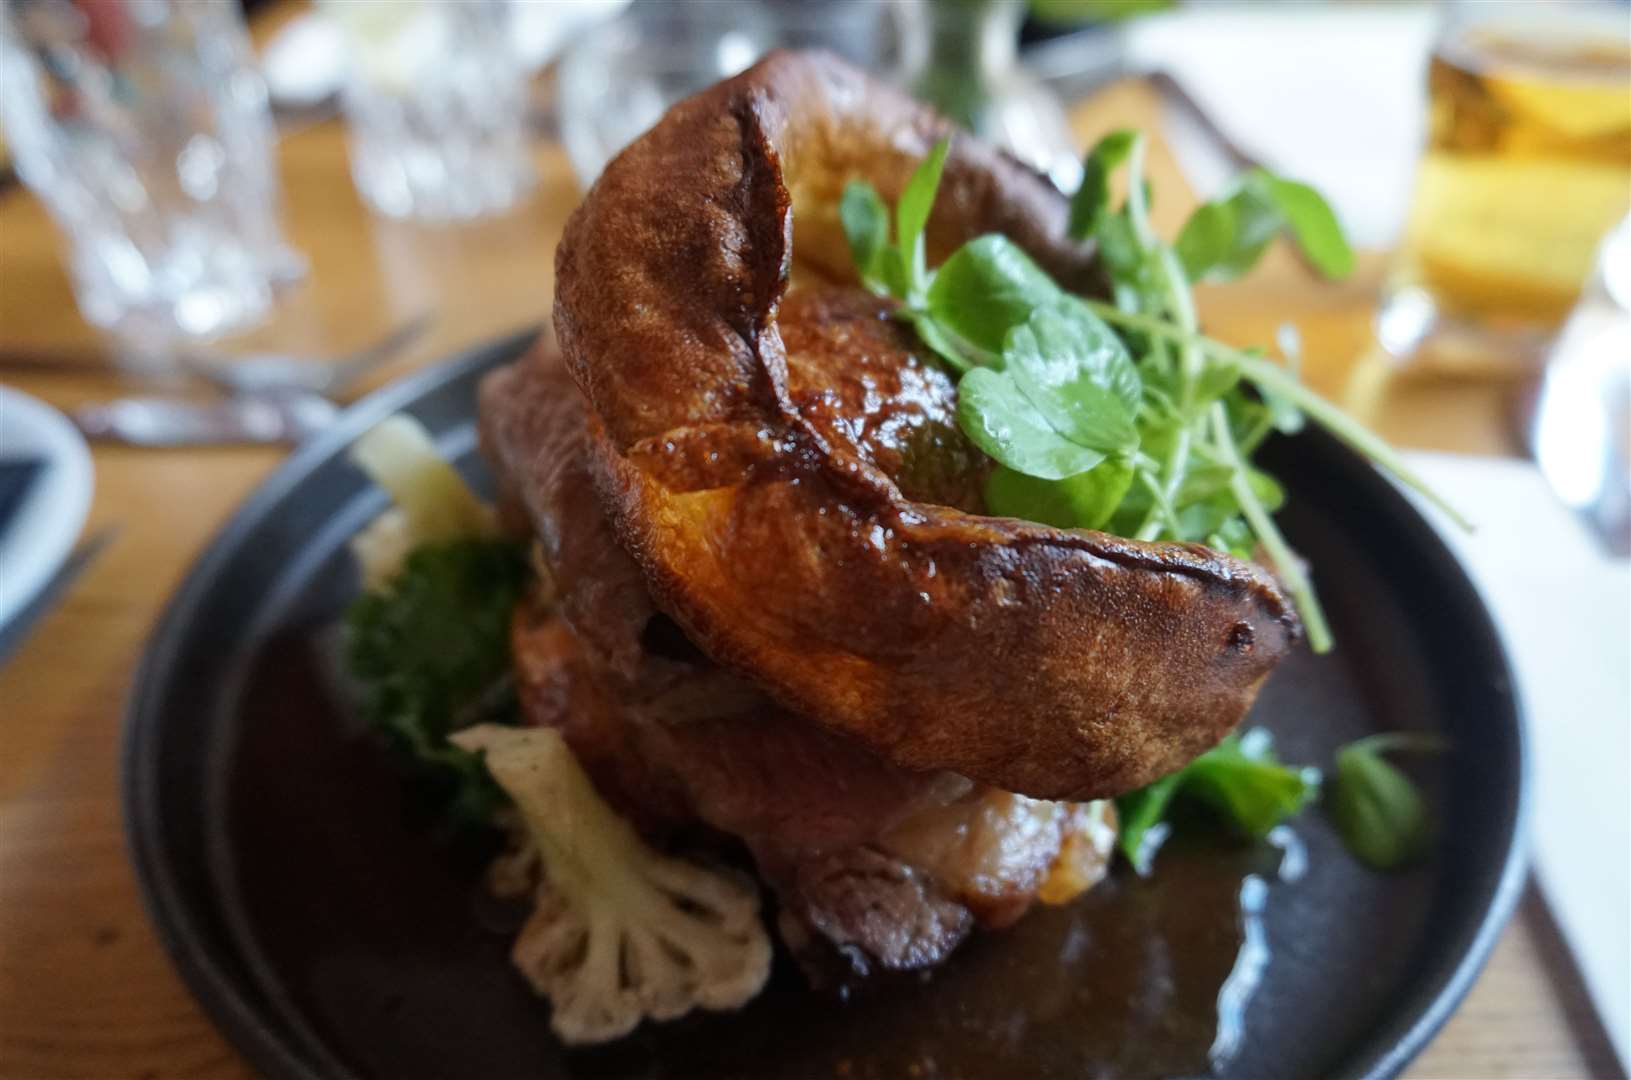 The Sunday roast is a real treat. Picture: Federica Stefani.